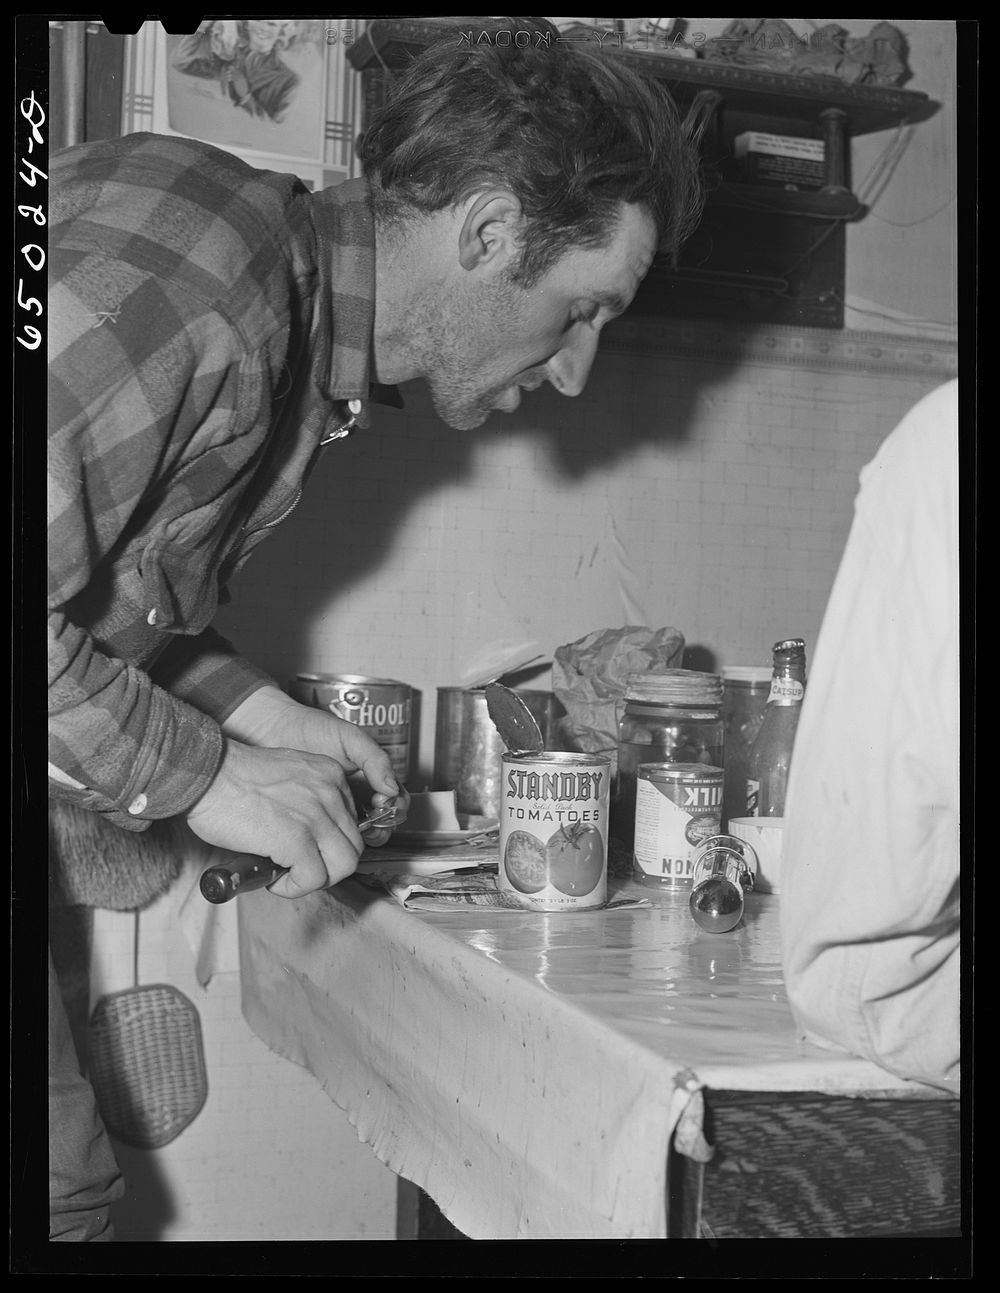 Garfield County, Montana. Sheepherder opening cans for supper in his winter quarters. Sourced from the Library of Congress.